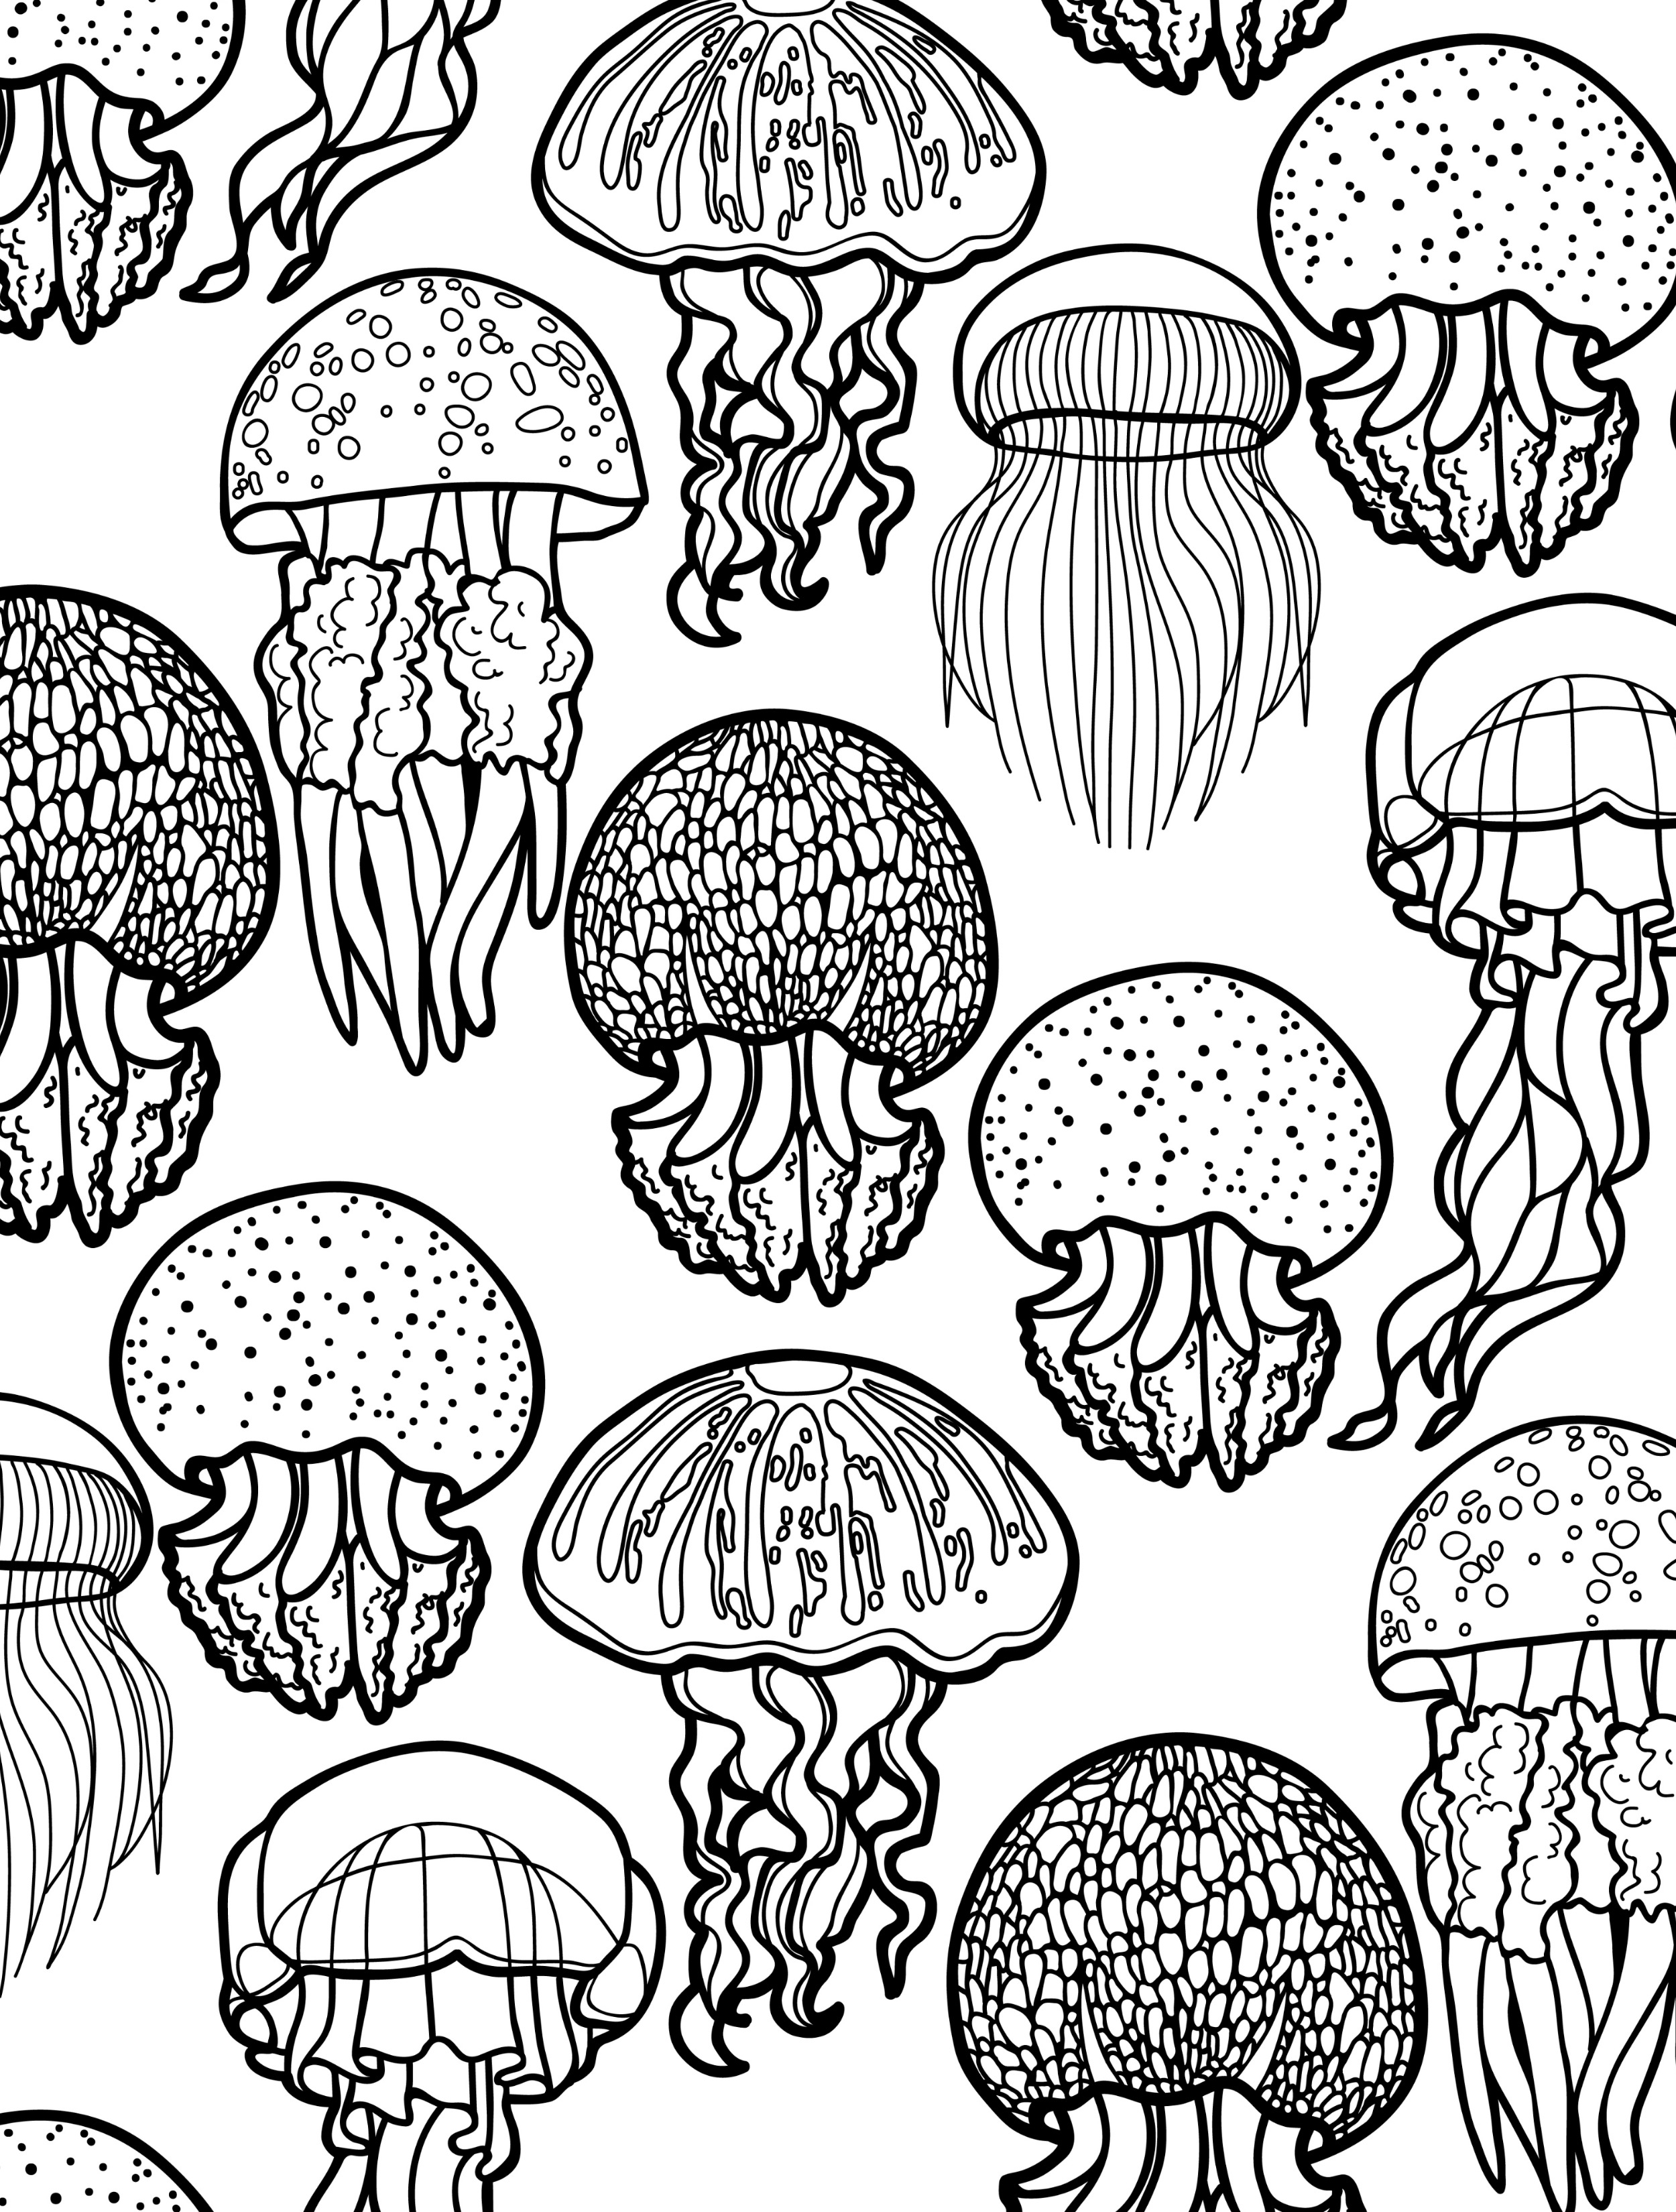 Simple Adult Coloring Pages At GetColorings Free Printable Colorings Pages To Print And Color